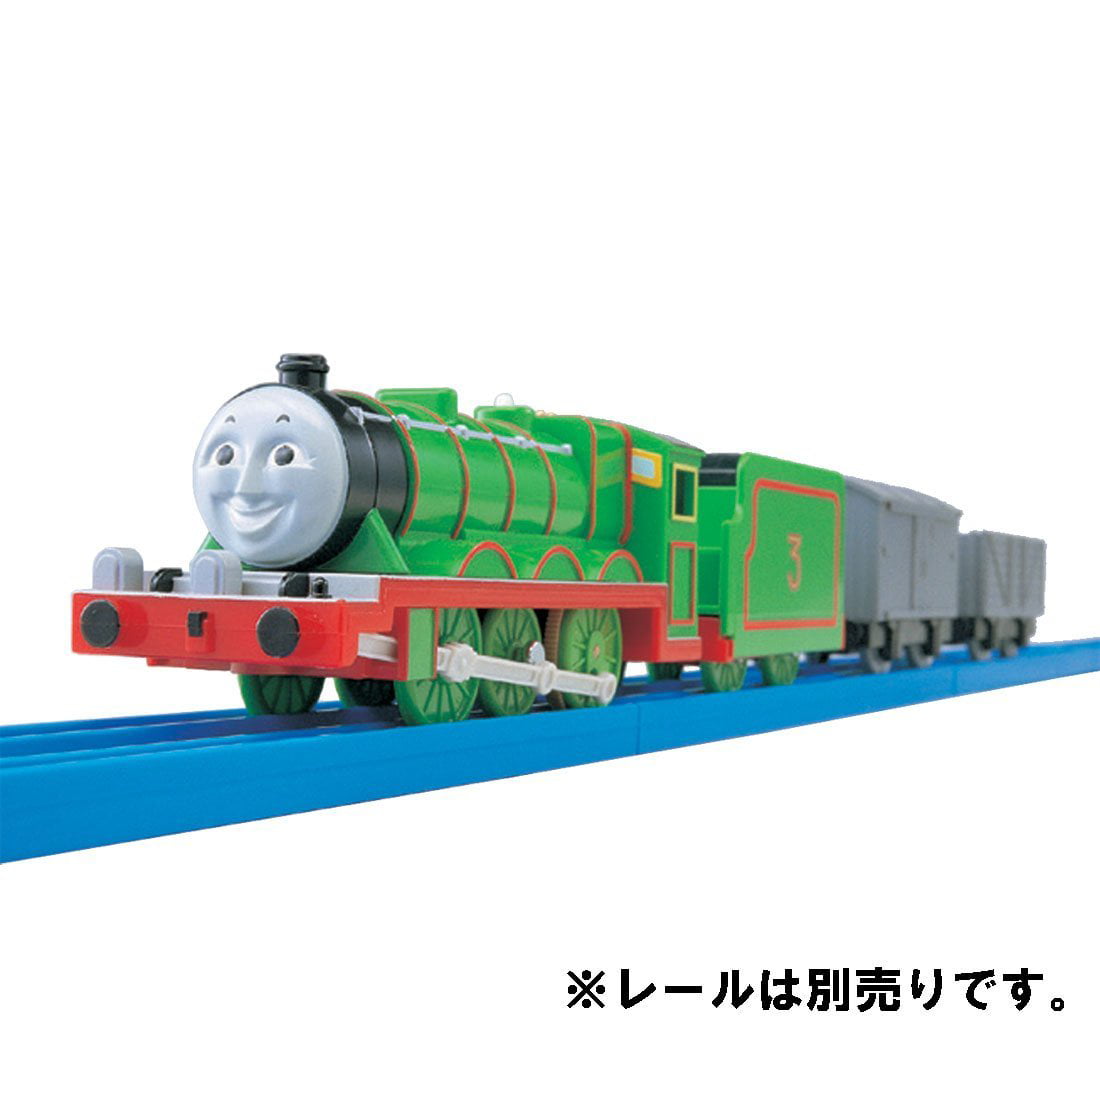 Takara Tomy TS-20 Thomas and Friends Train Set for sale online